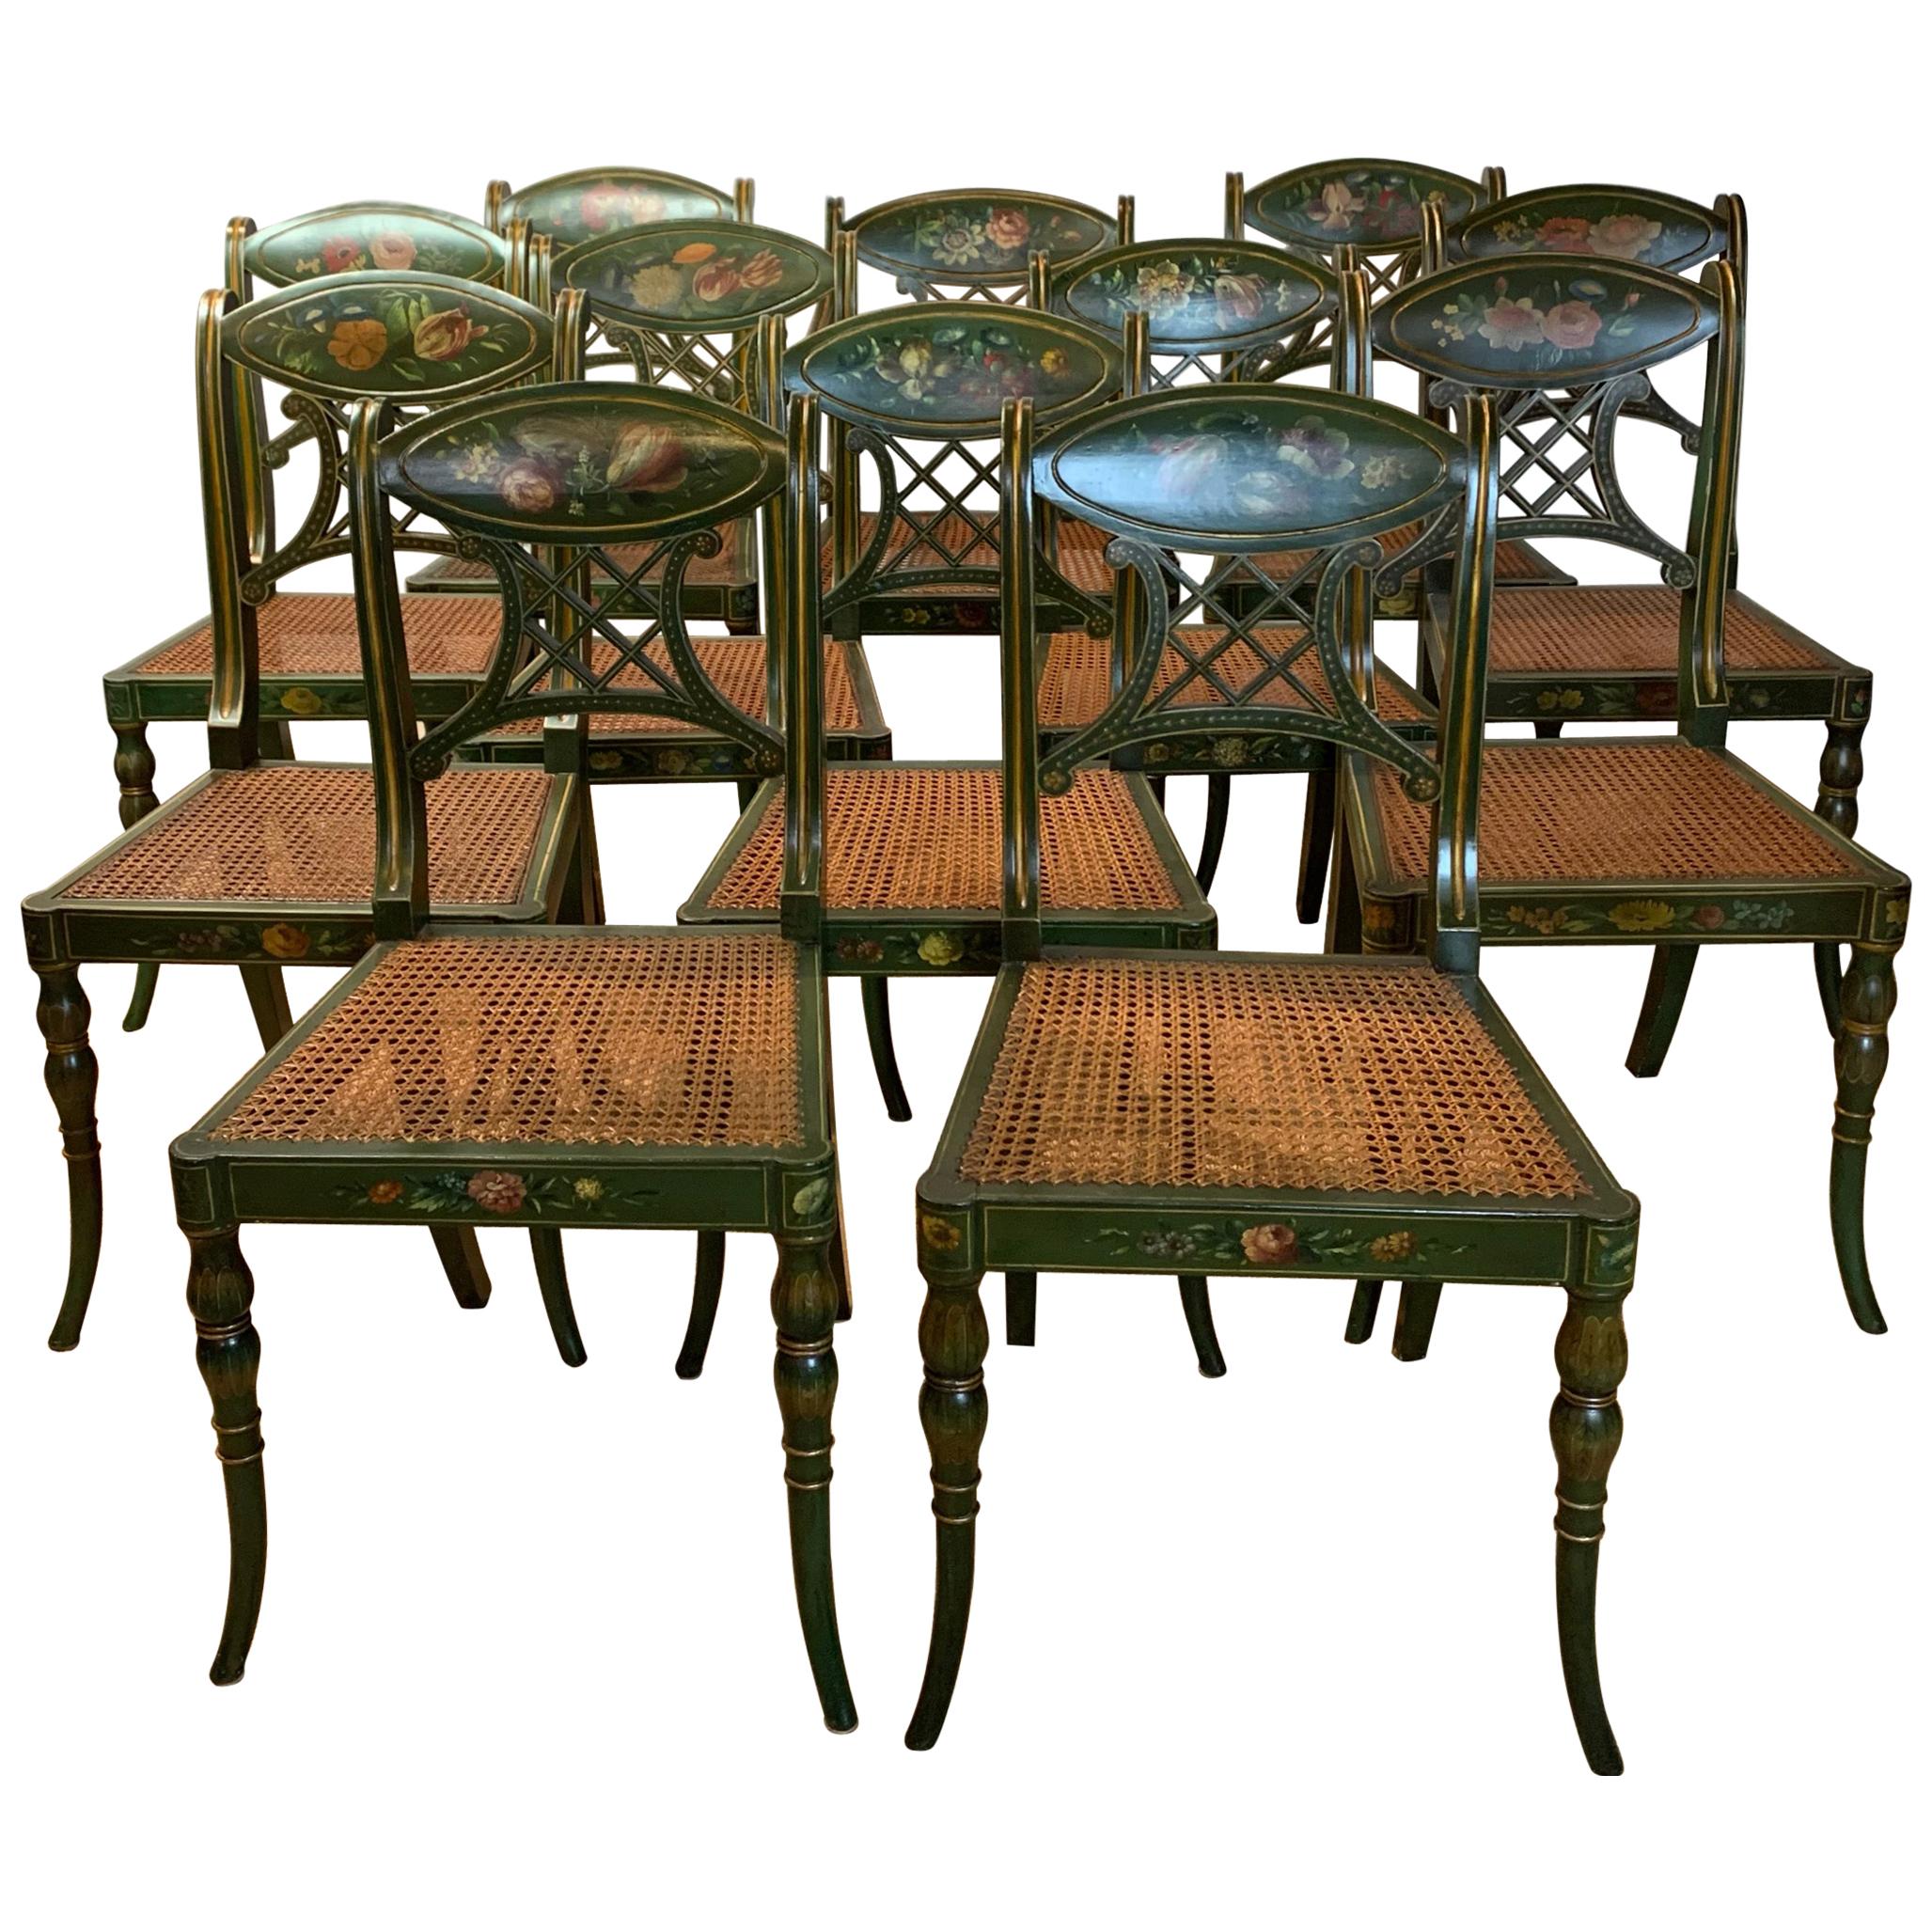 Set of 22 Paint Decorated Regency Style Dining Chairs